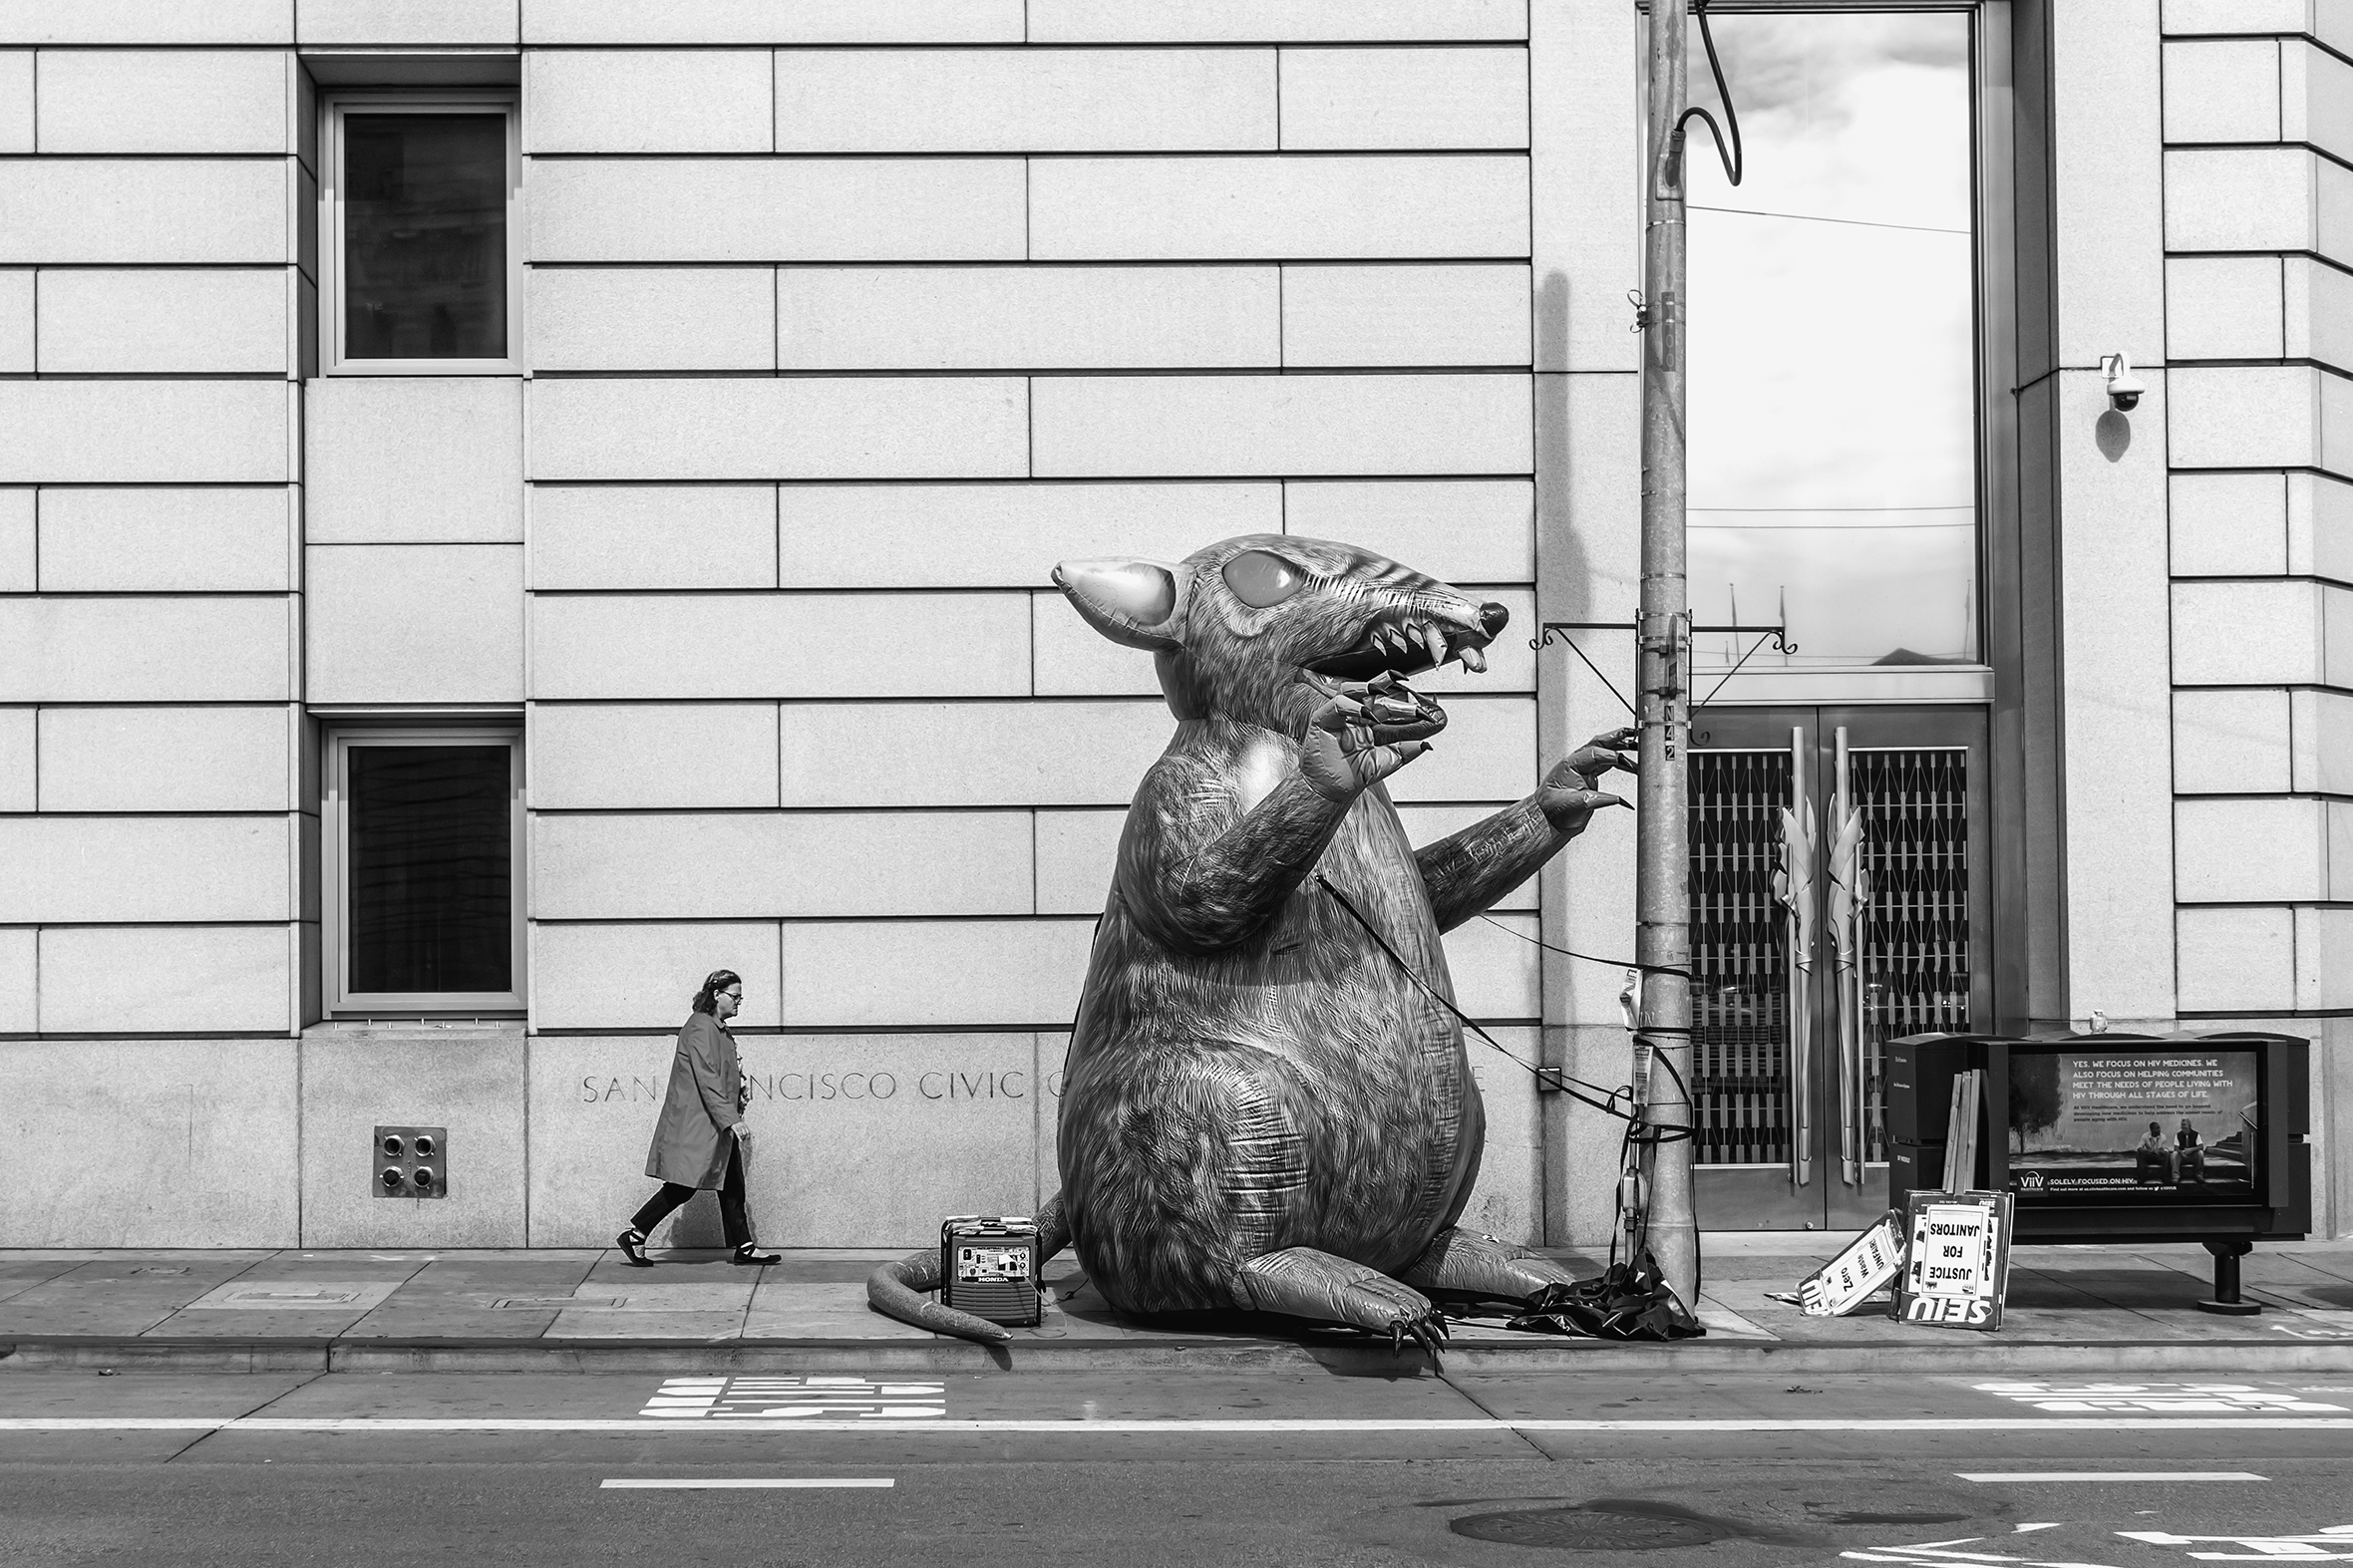 A one-story tall, violent-looking, inflatable rat is tethered to a street pole outside the San Francisco Civic Center. Next to the rat are SEIU picket signs that mention Justice for Janitors. A woman walks by the rat.